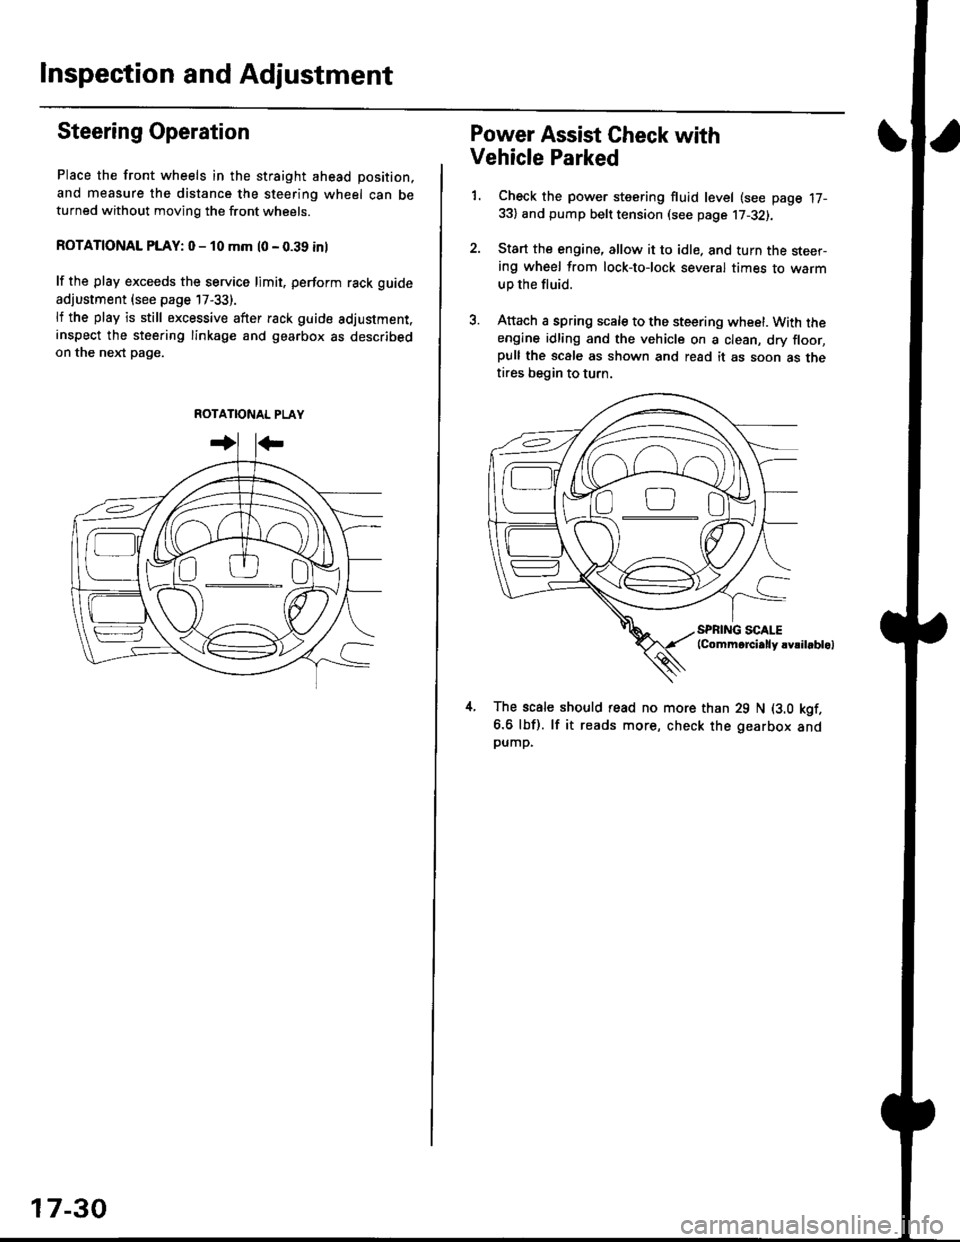 HONDA CIVIC 1996 6.G Owners Manual Inspection and Adjustment
Steering Operation
Place the front wheels in the straight ahead position,
and measure the distance the steering wheel can beturned without moving the front wheels.
ROTATIONAL